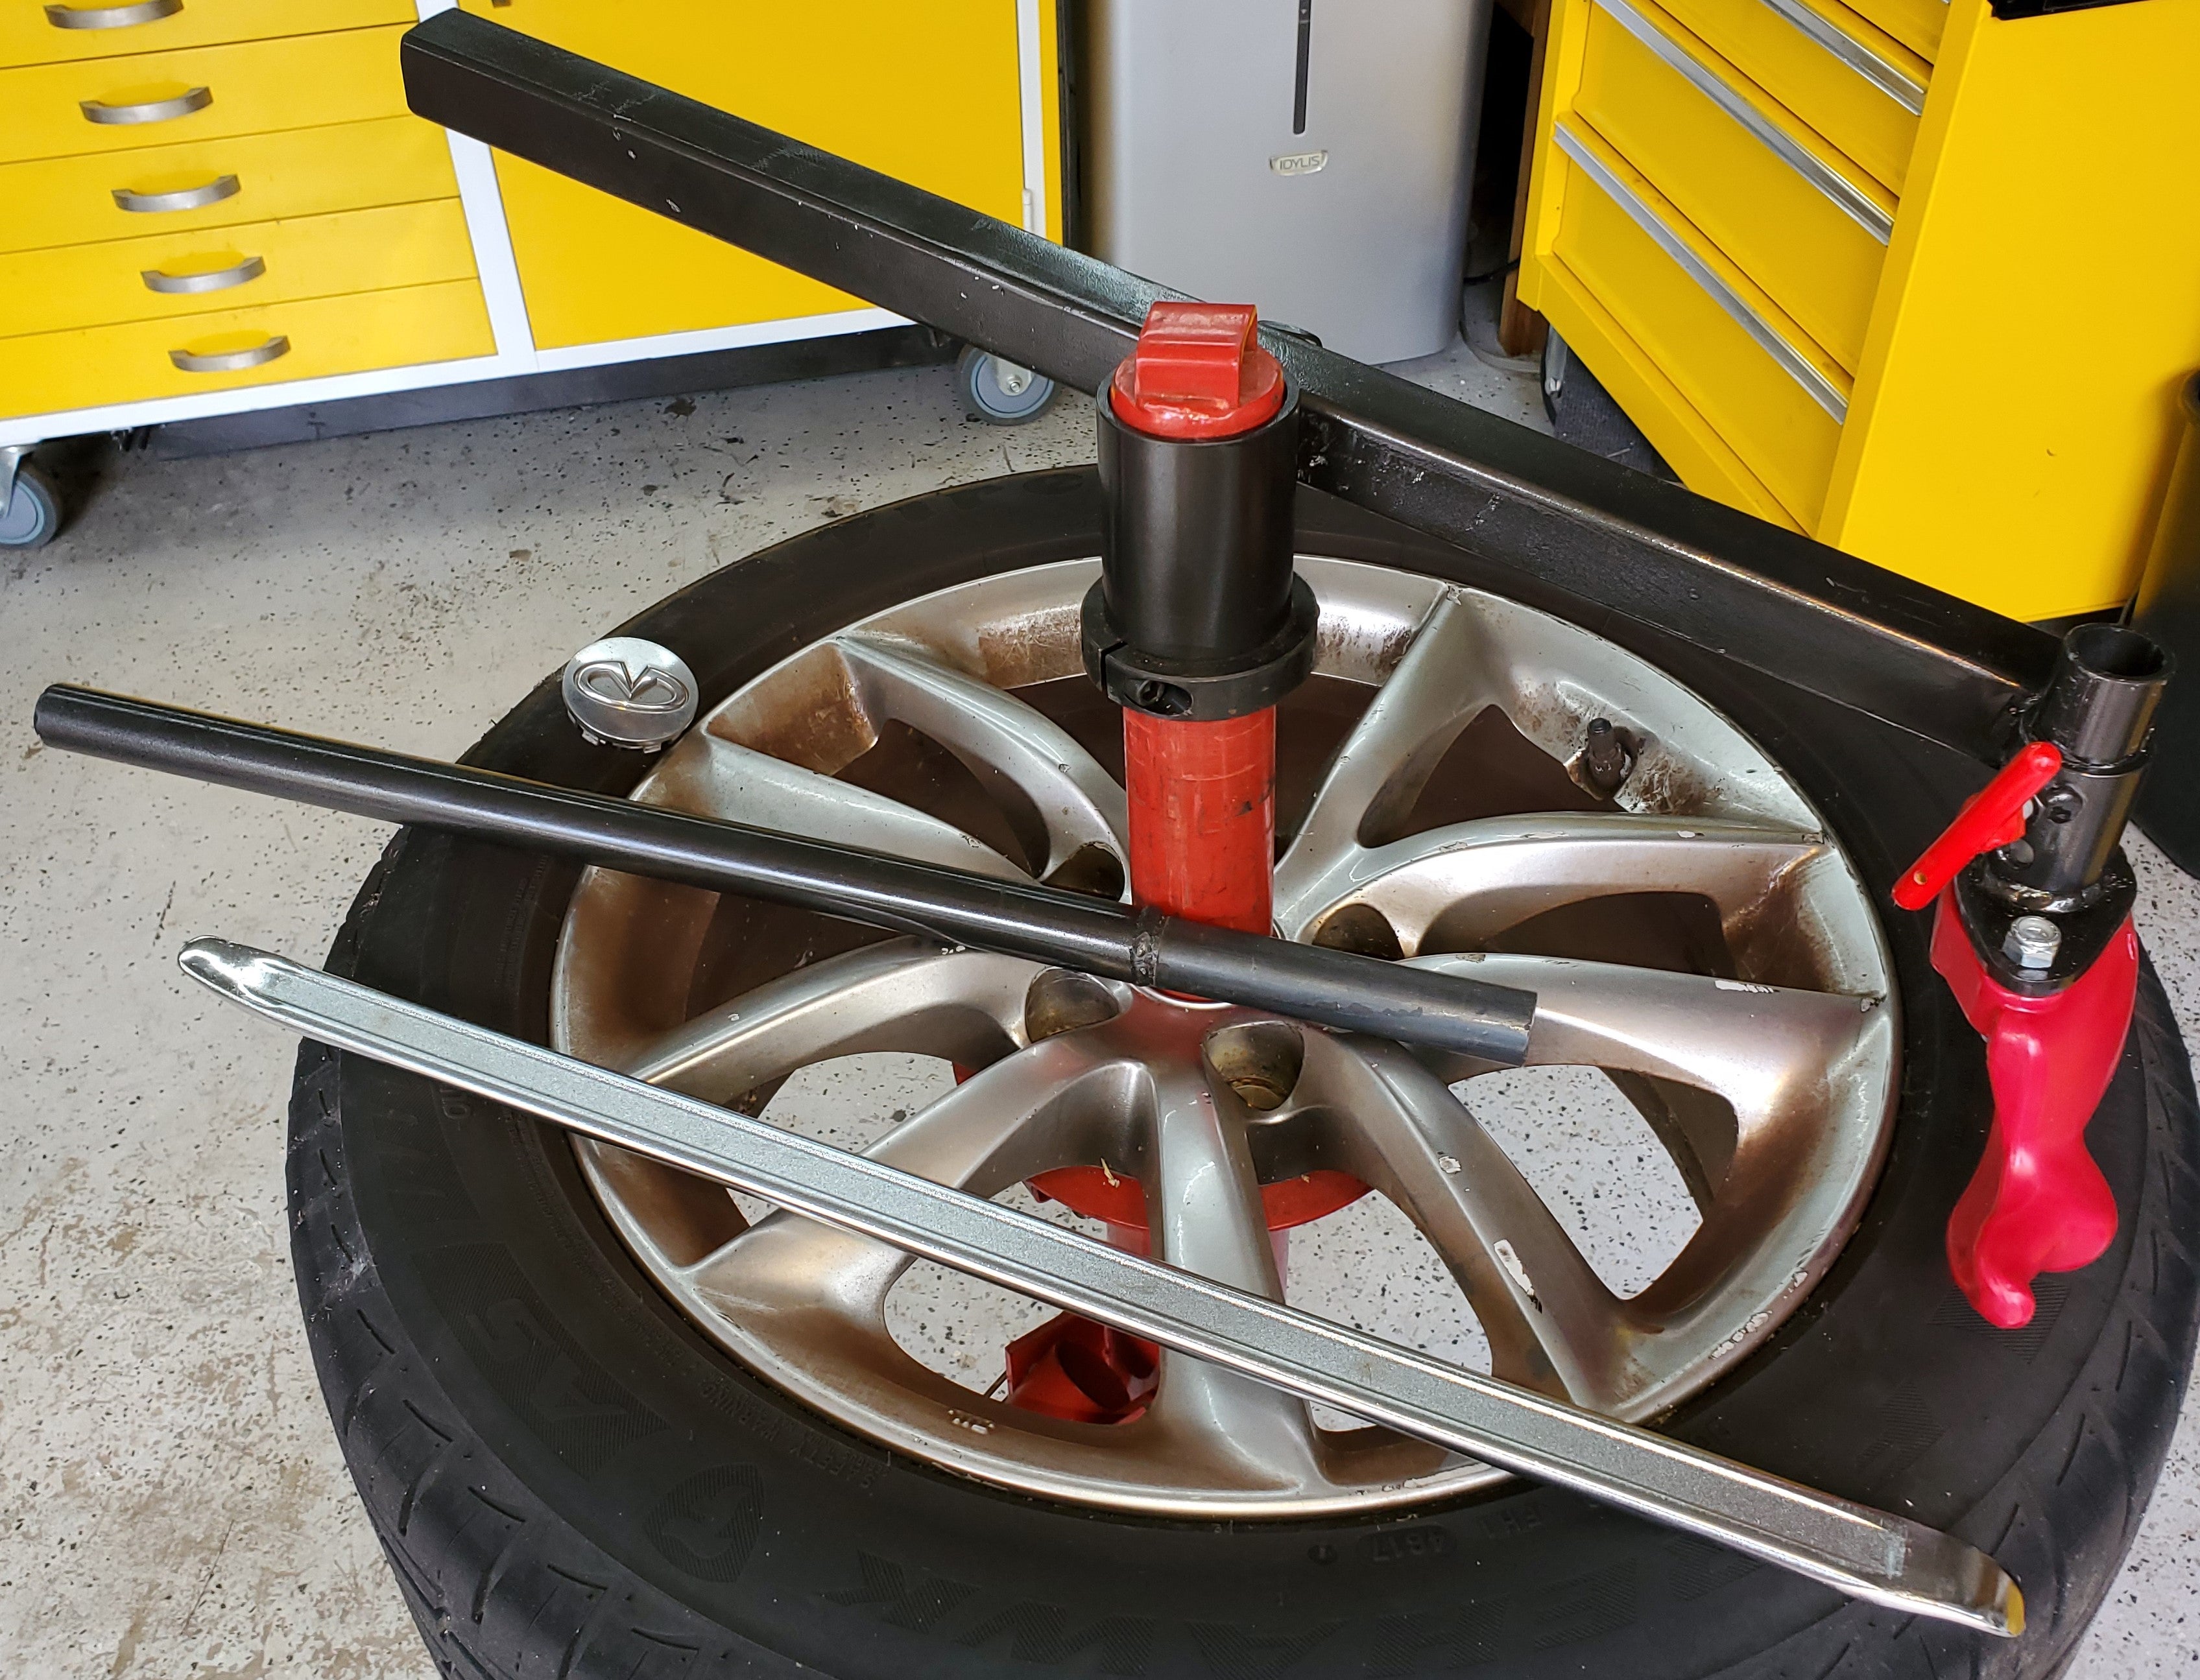 Kit 2 Unlimited Tire Changer Duck head conversion for car tire changers.